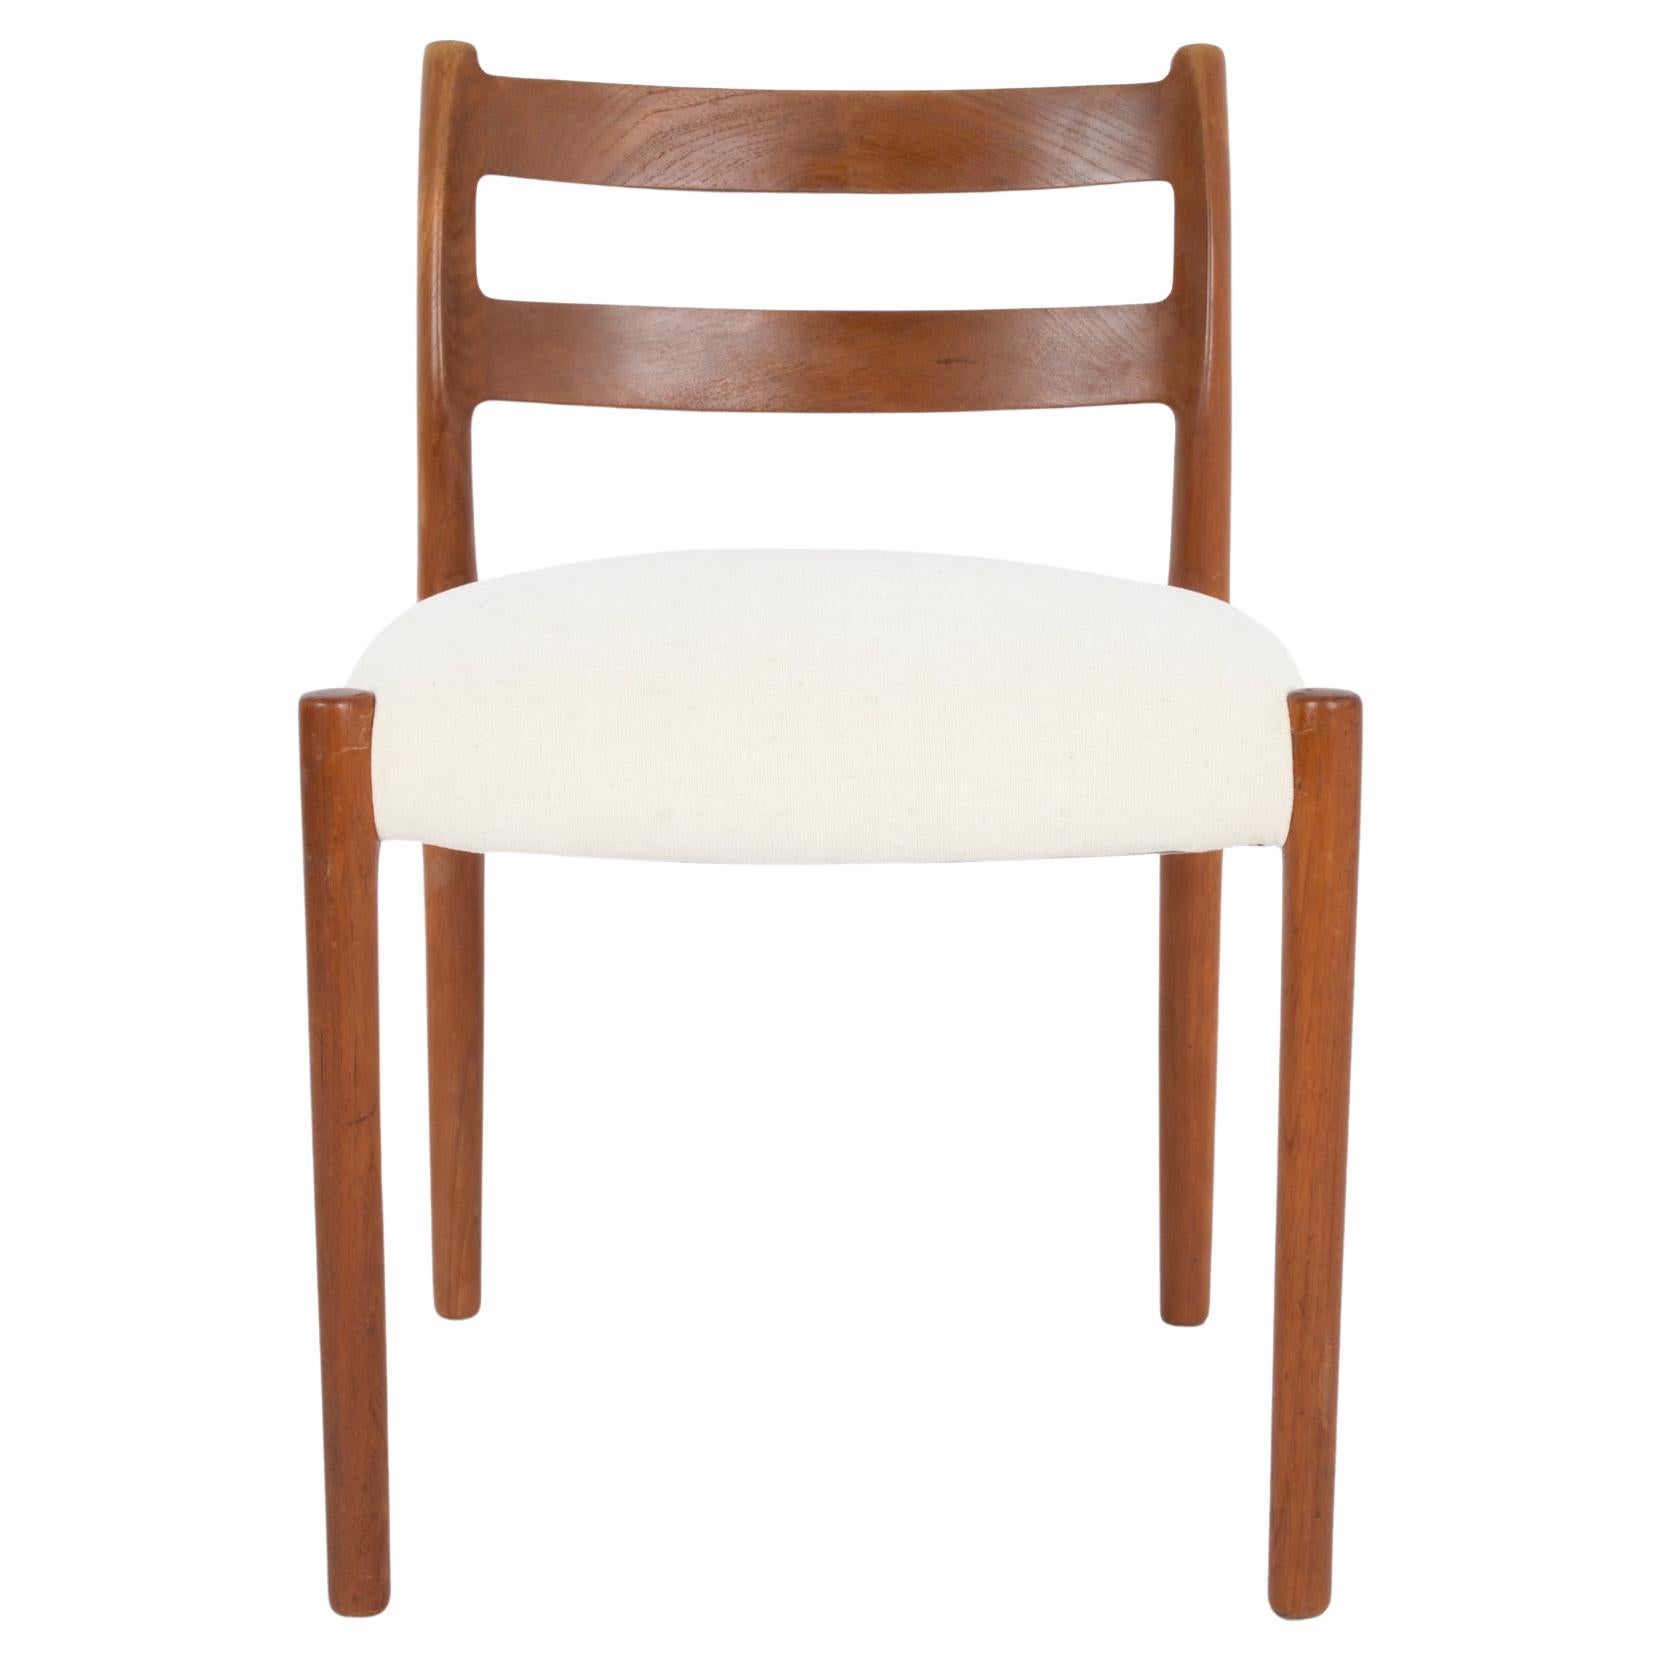 1960s Danish Wooden Chair with Upholstered Seat For Sale